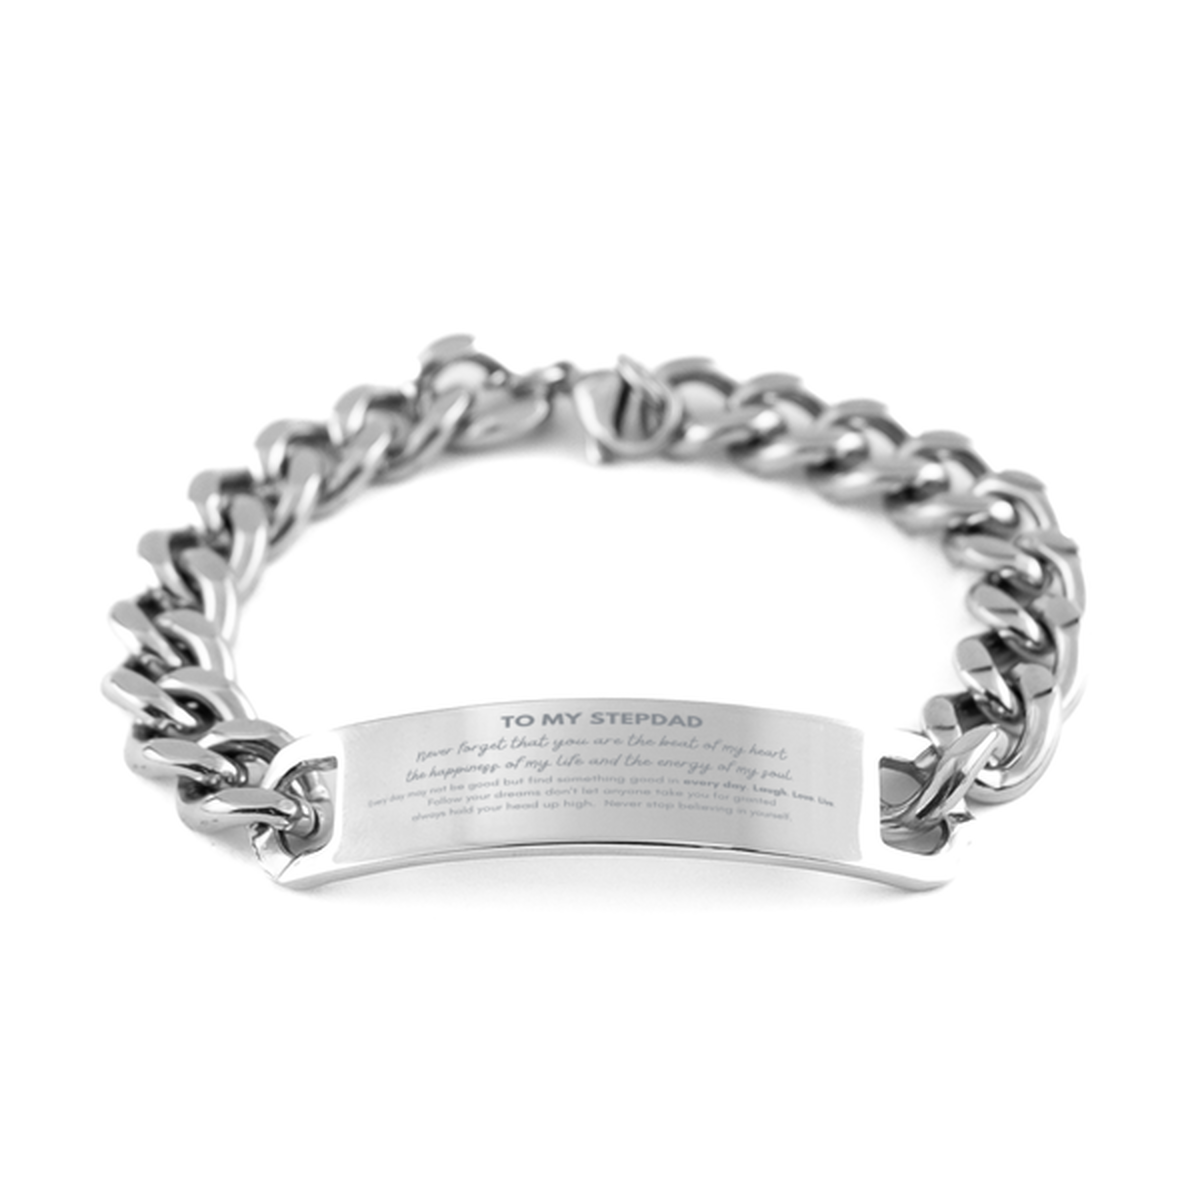 To My Stepdad Bracelet Gifts, Christmas Stepdad Cuban Chain Stainless Steel Bracelet Present, Birthday Unique Motivational For Stepdad, To My Stepdad Never forget that you are the beat of my heart the happiness of my life and the energy of my soul